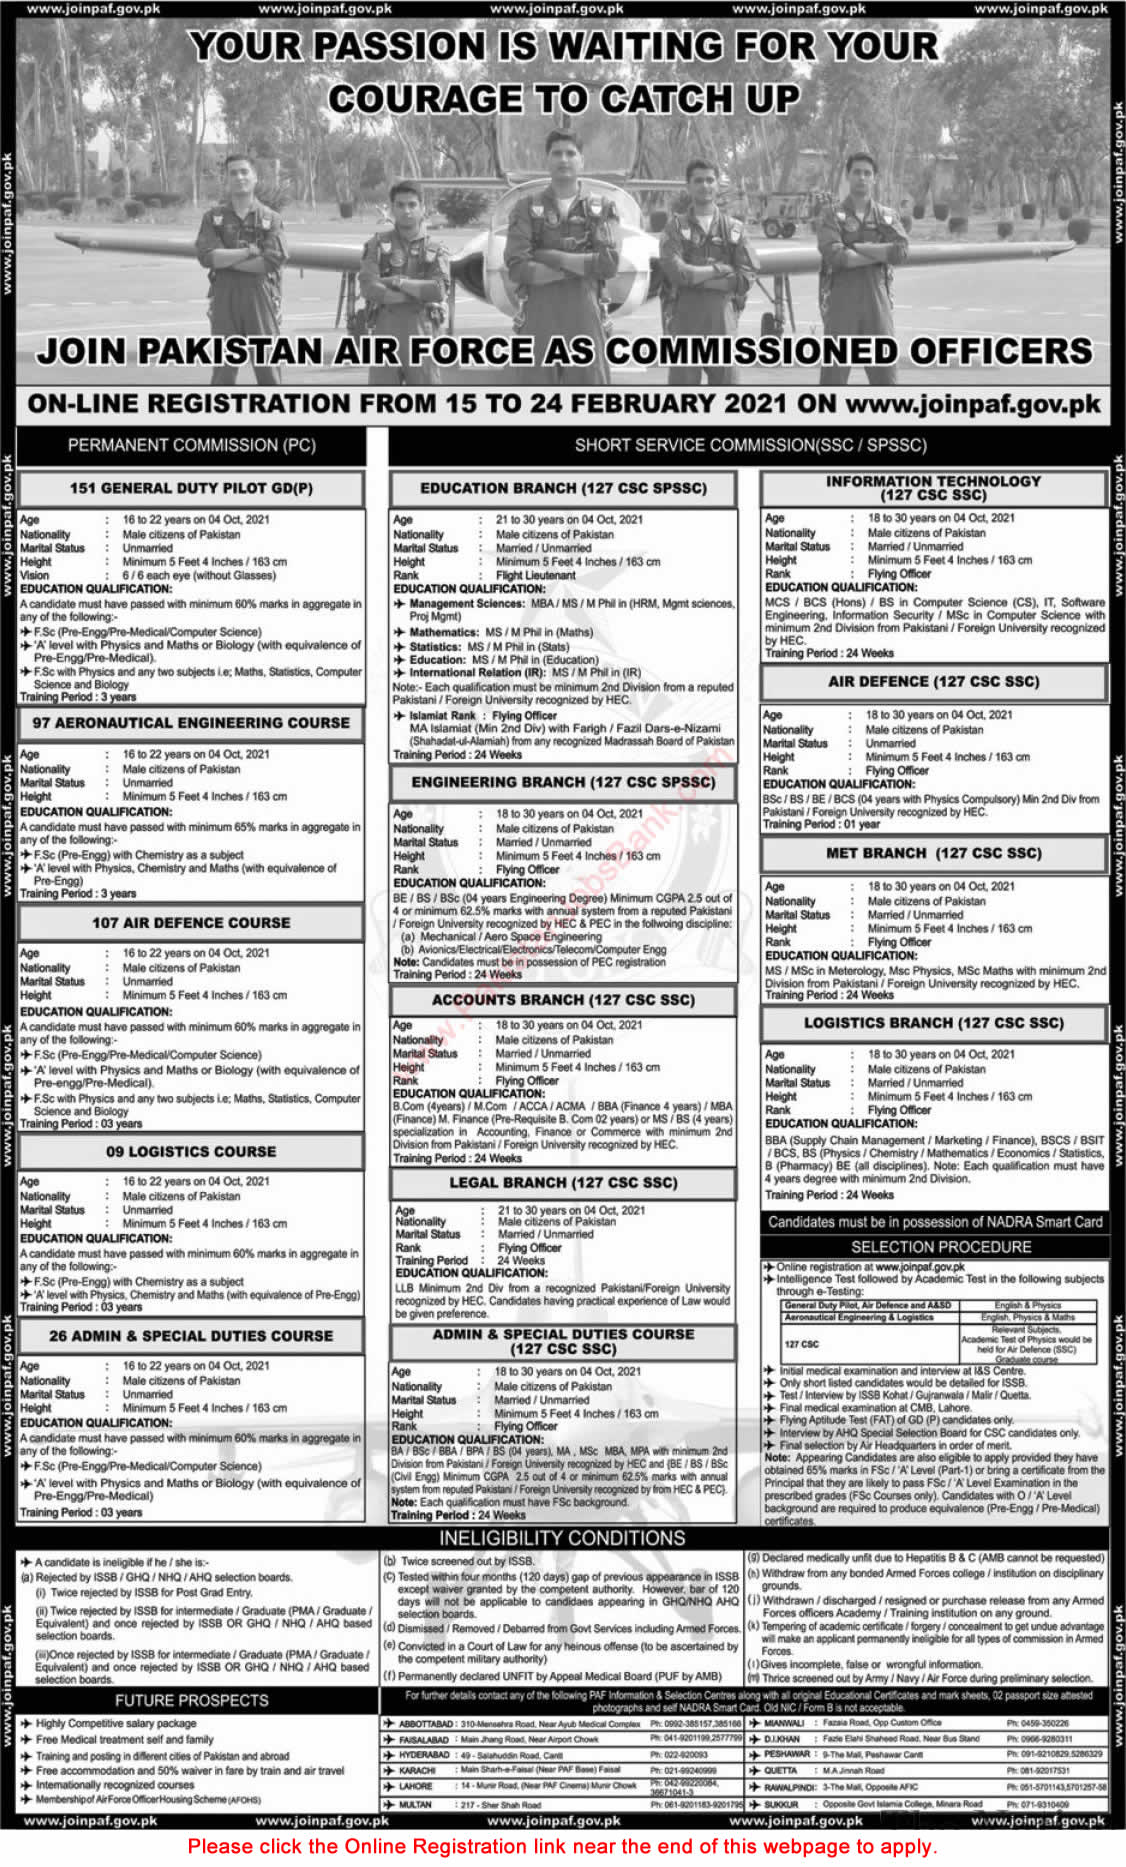 Join Pakistan Air Force as Commissioned Officer 2021 February Online Registration in SPSSC & Permanent Commission Latest